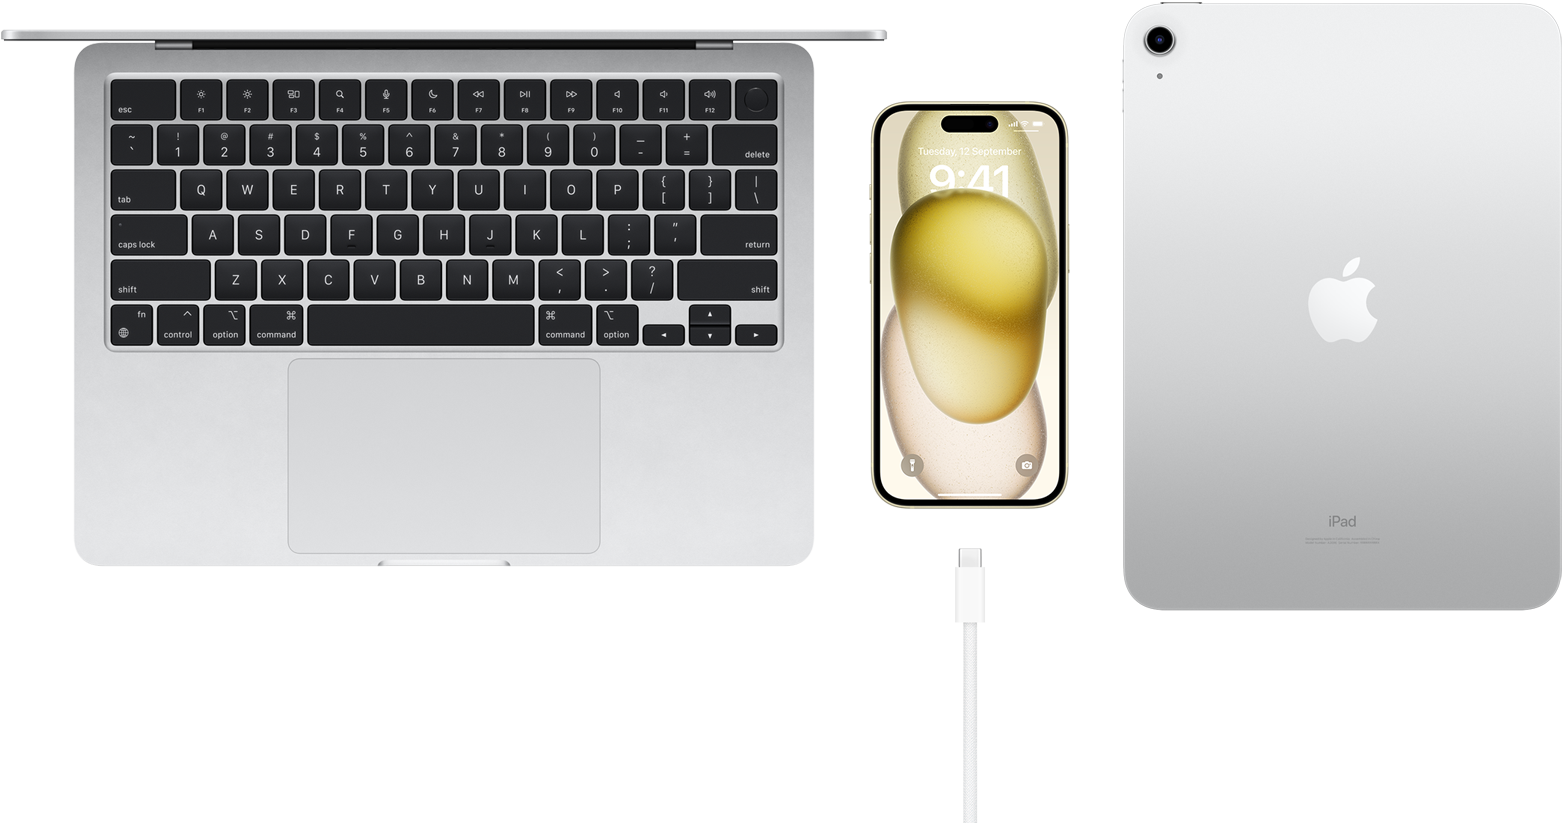 Top view of MacBook Pro, iPhone 15 with a USB-C connector, and iPad